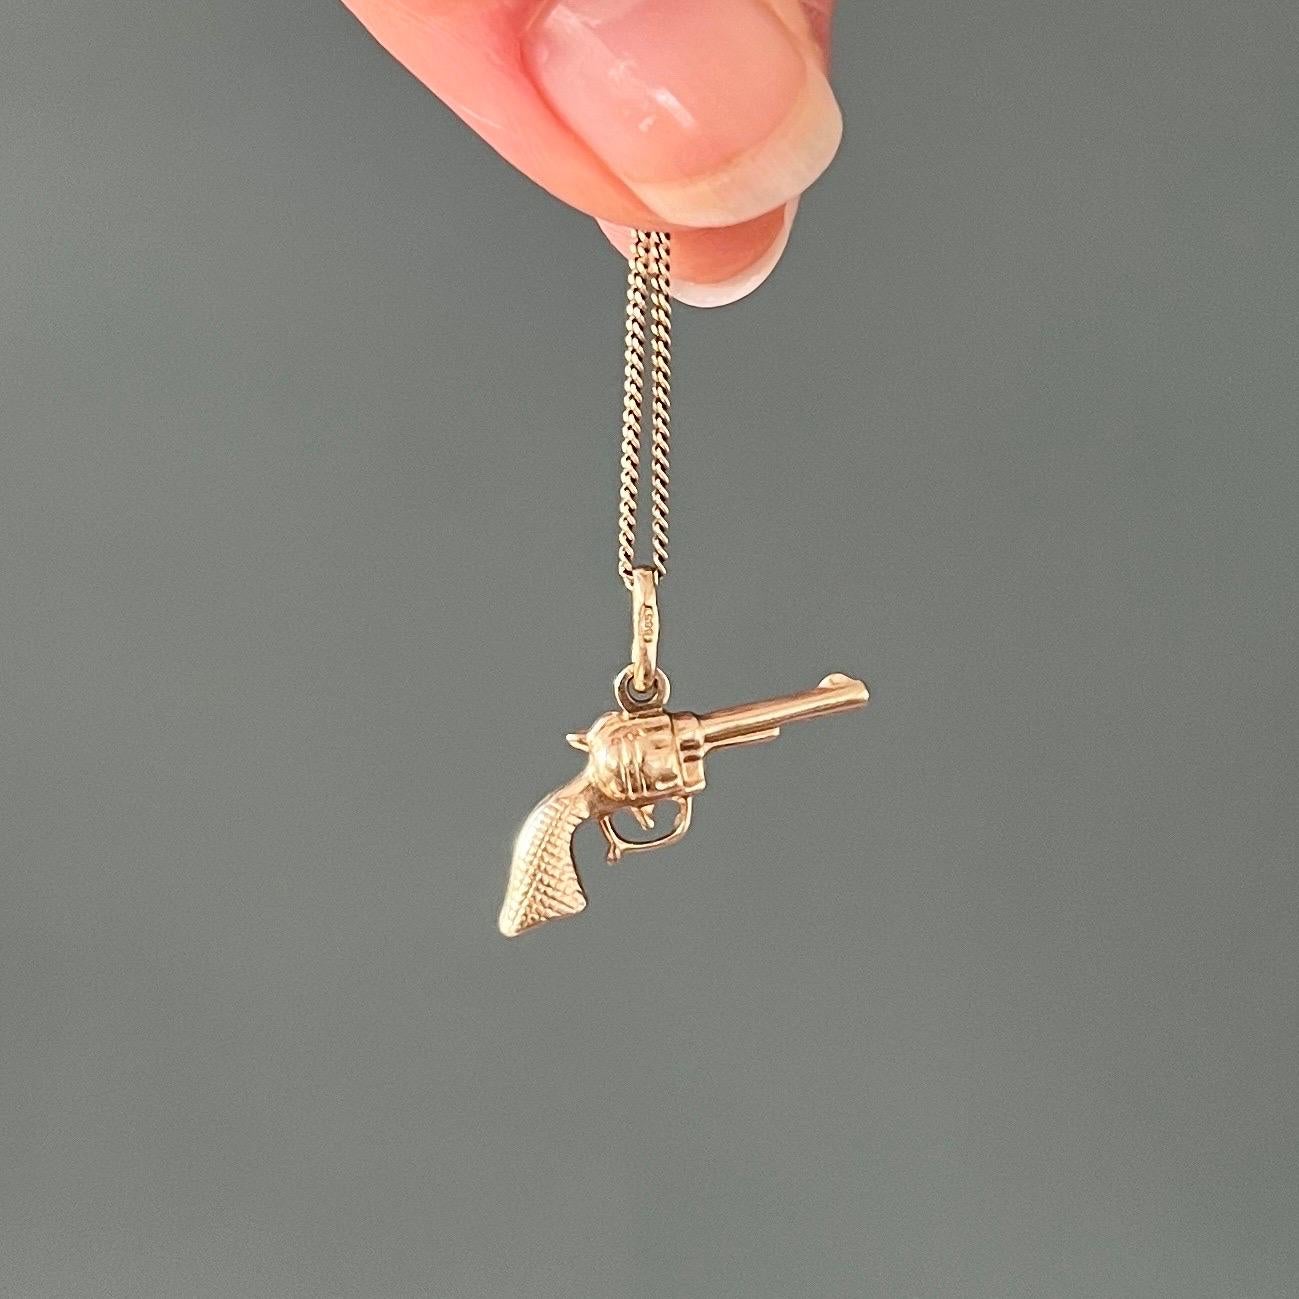 A vintage gold pistol charm pendant. The charm pistol is nicely detailed and created in 14 karat yellow gold. Charms are great to collect as wearable memories, it has a symbolic and often a sentimental value. They can be added to your necklace,